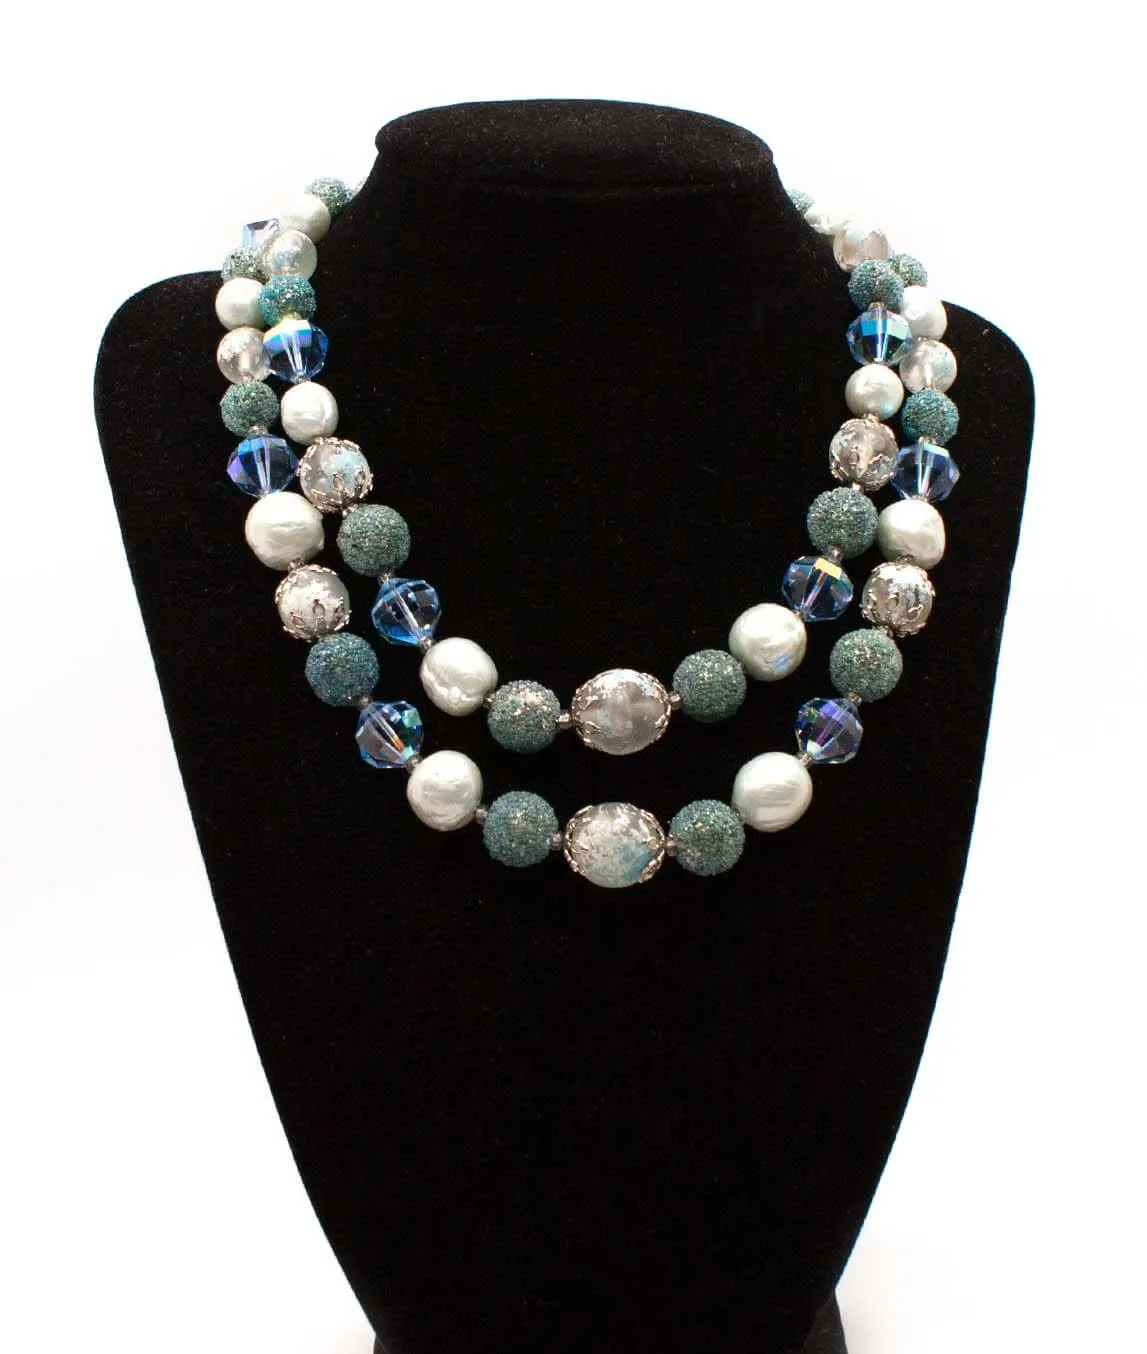 Vendôme Necklace blue green and white beads on a black display bust